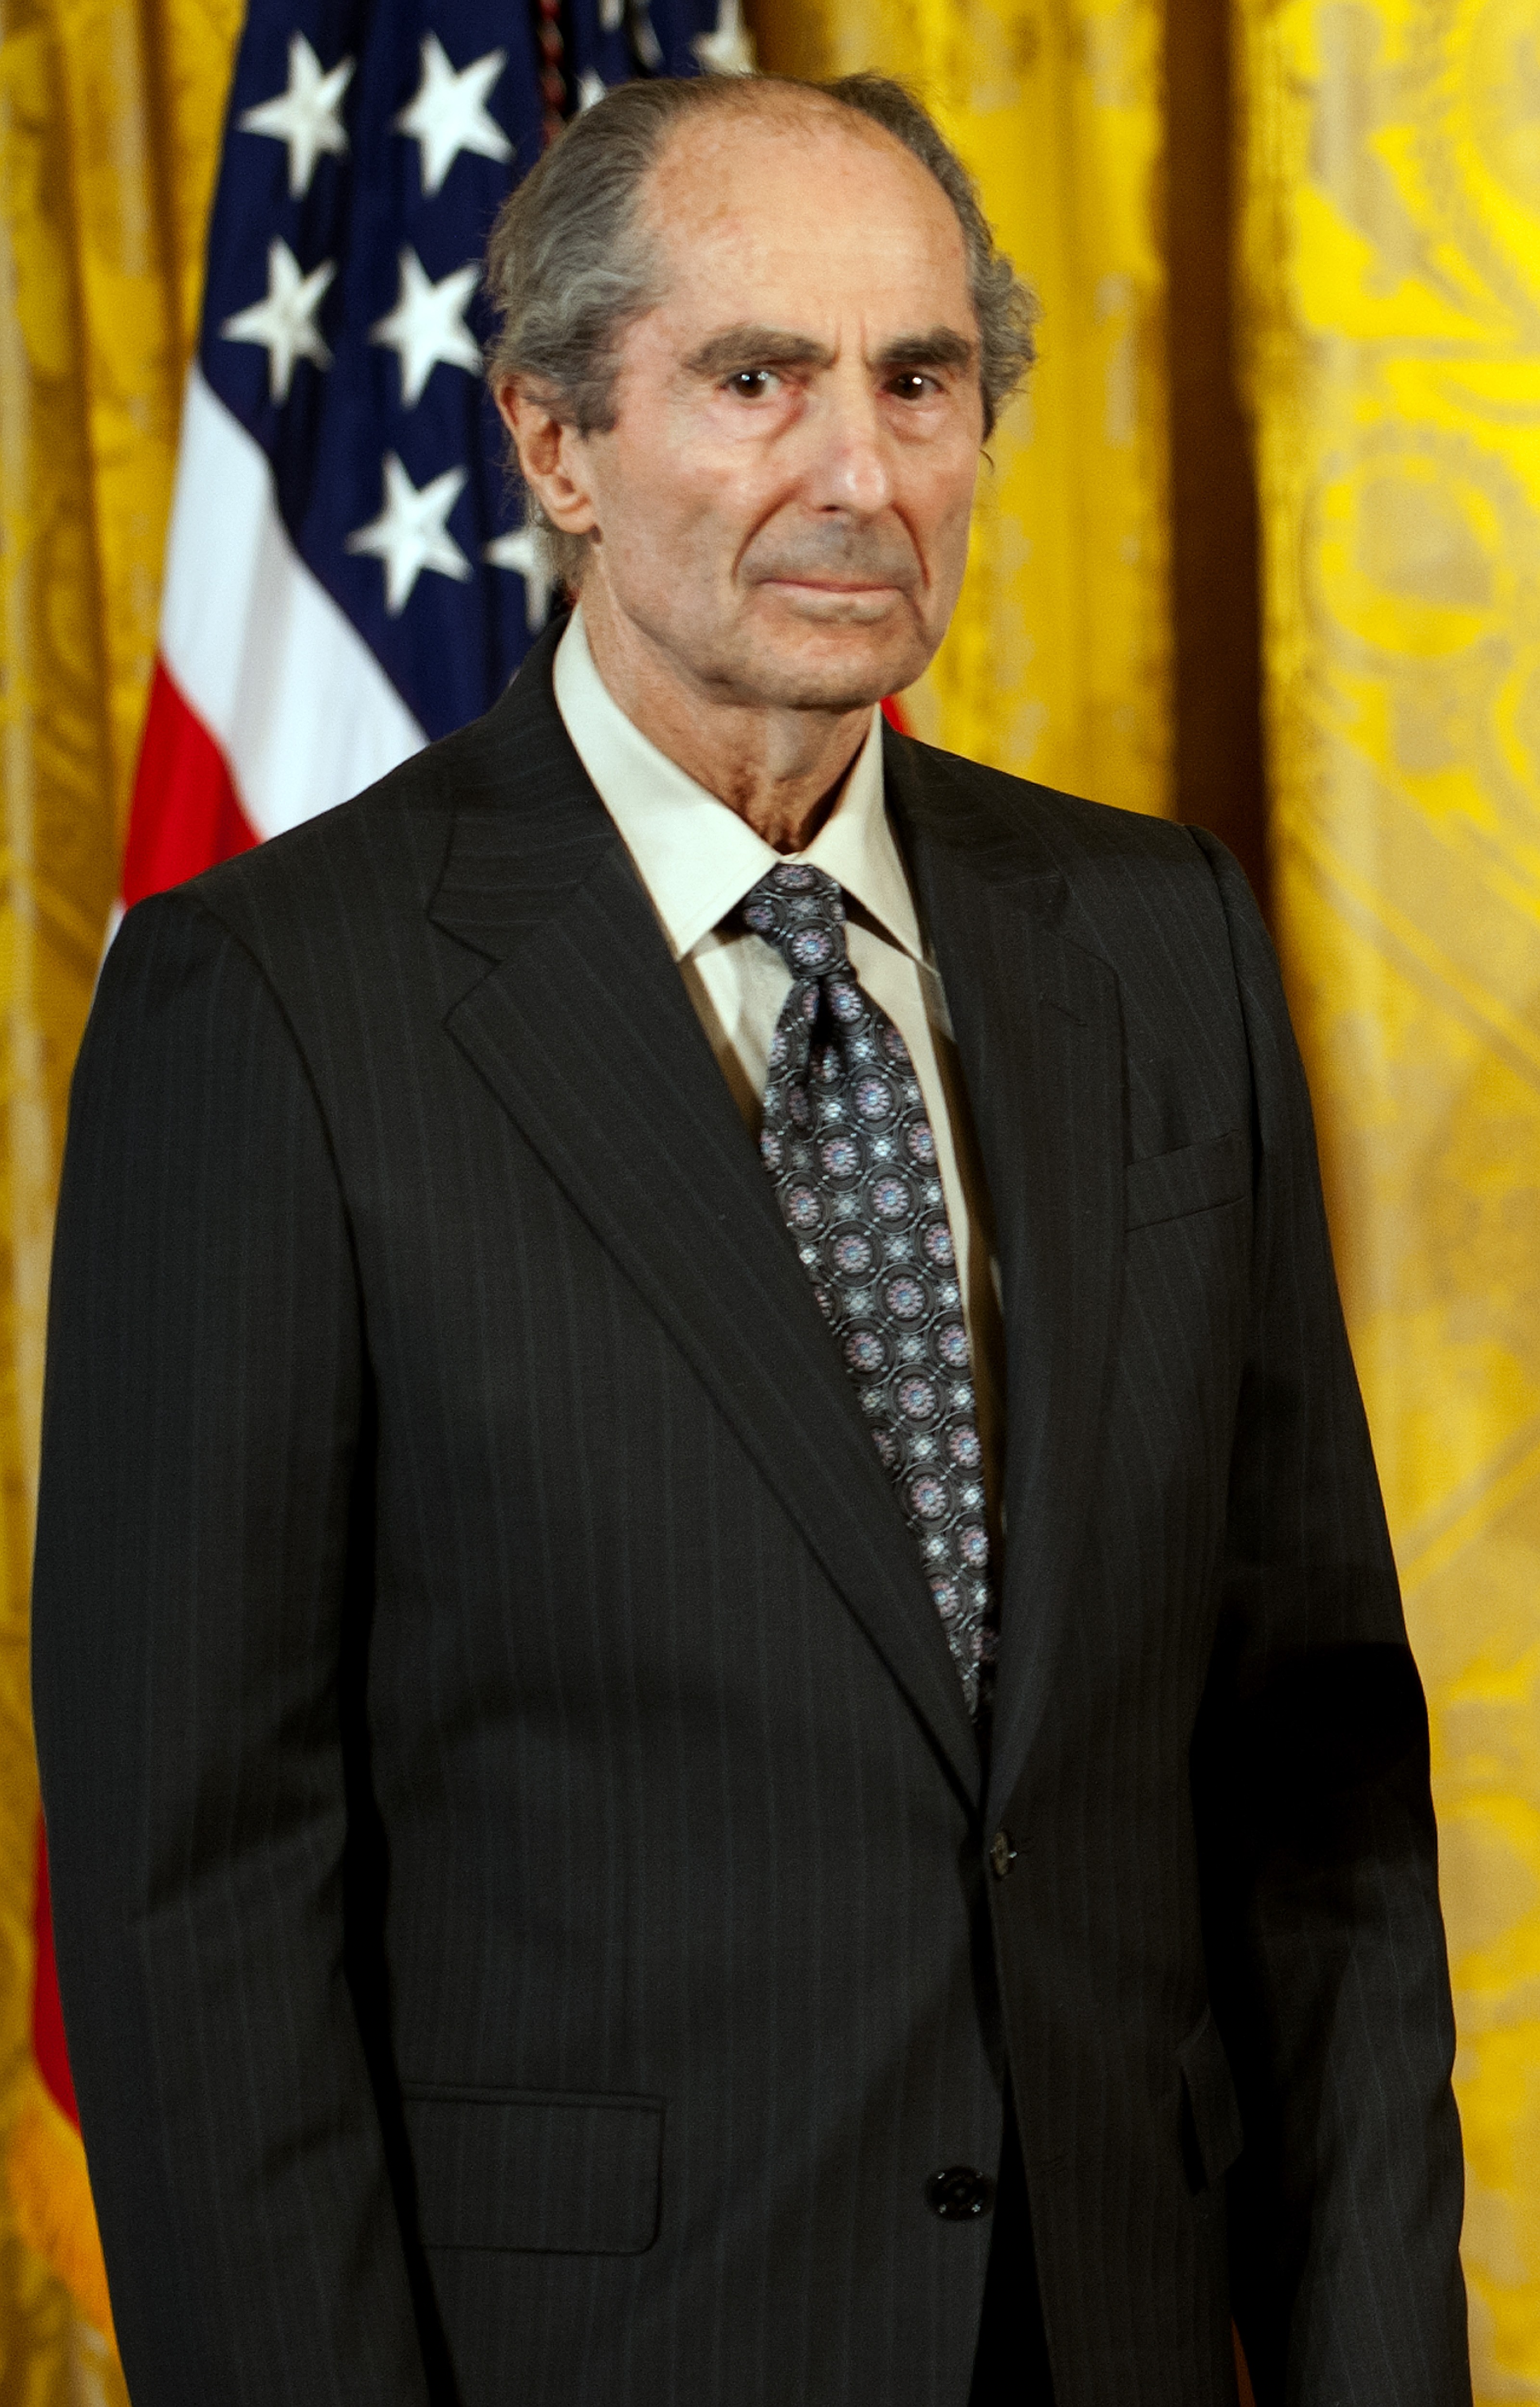 Philip Roth at the White House in 2011